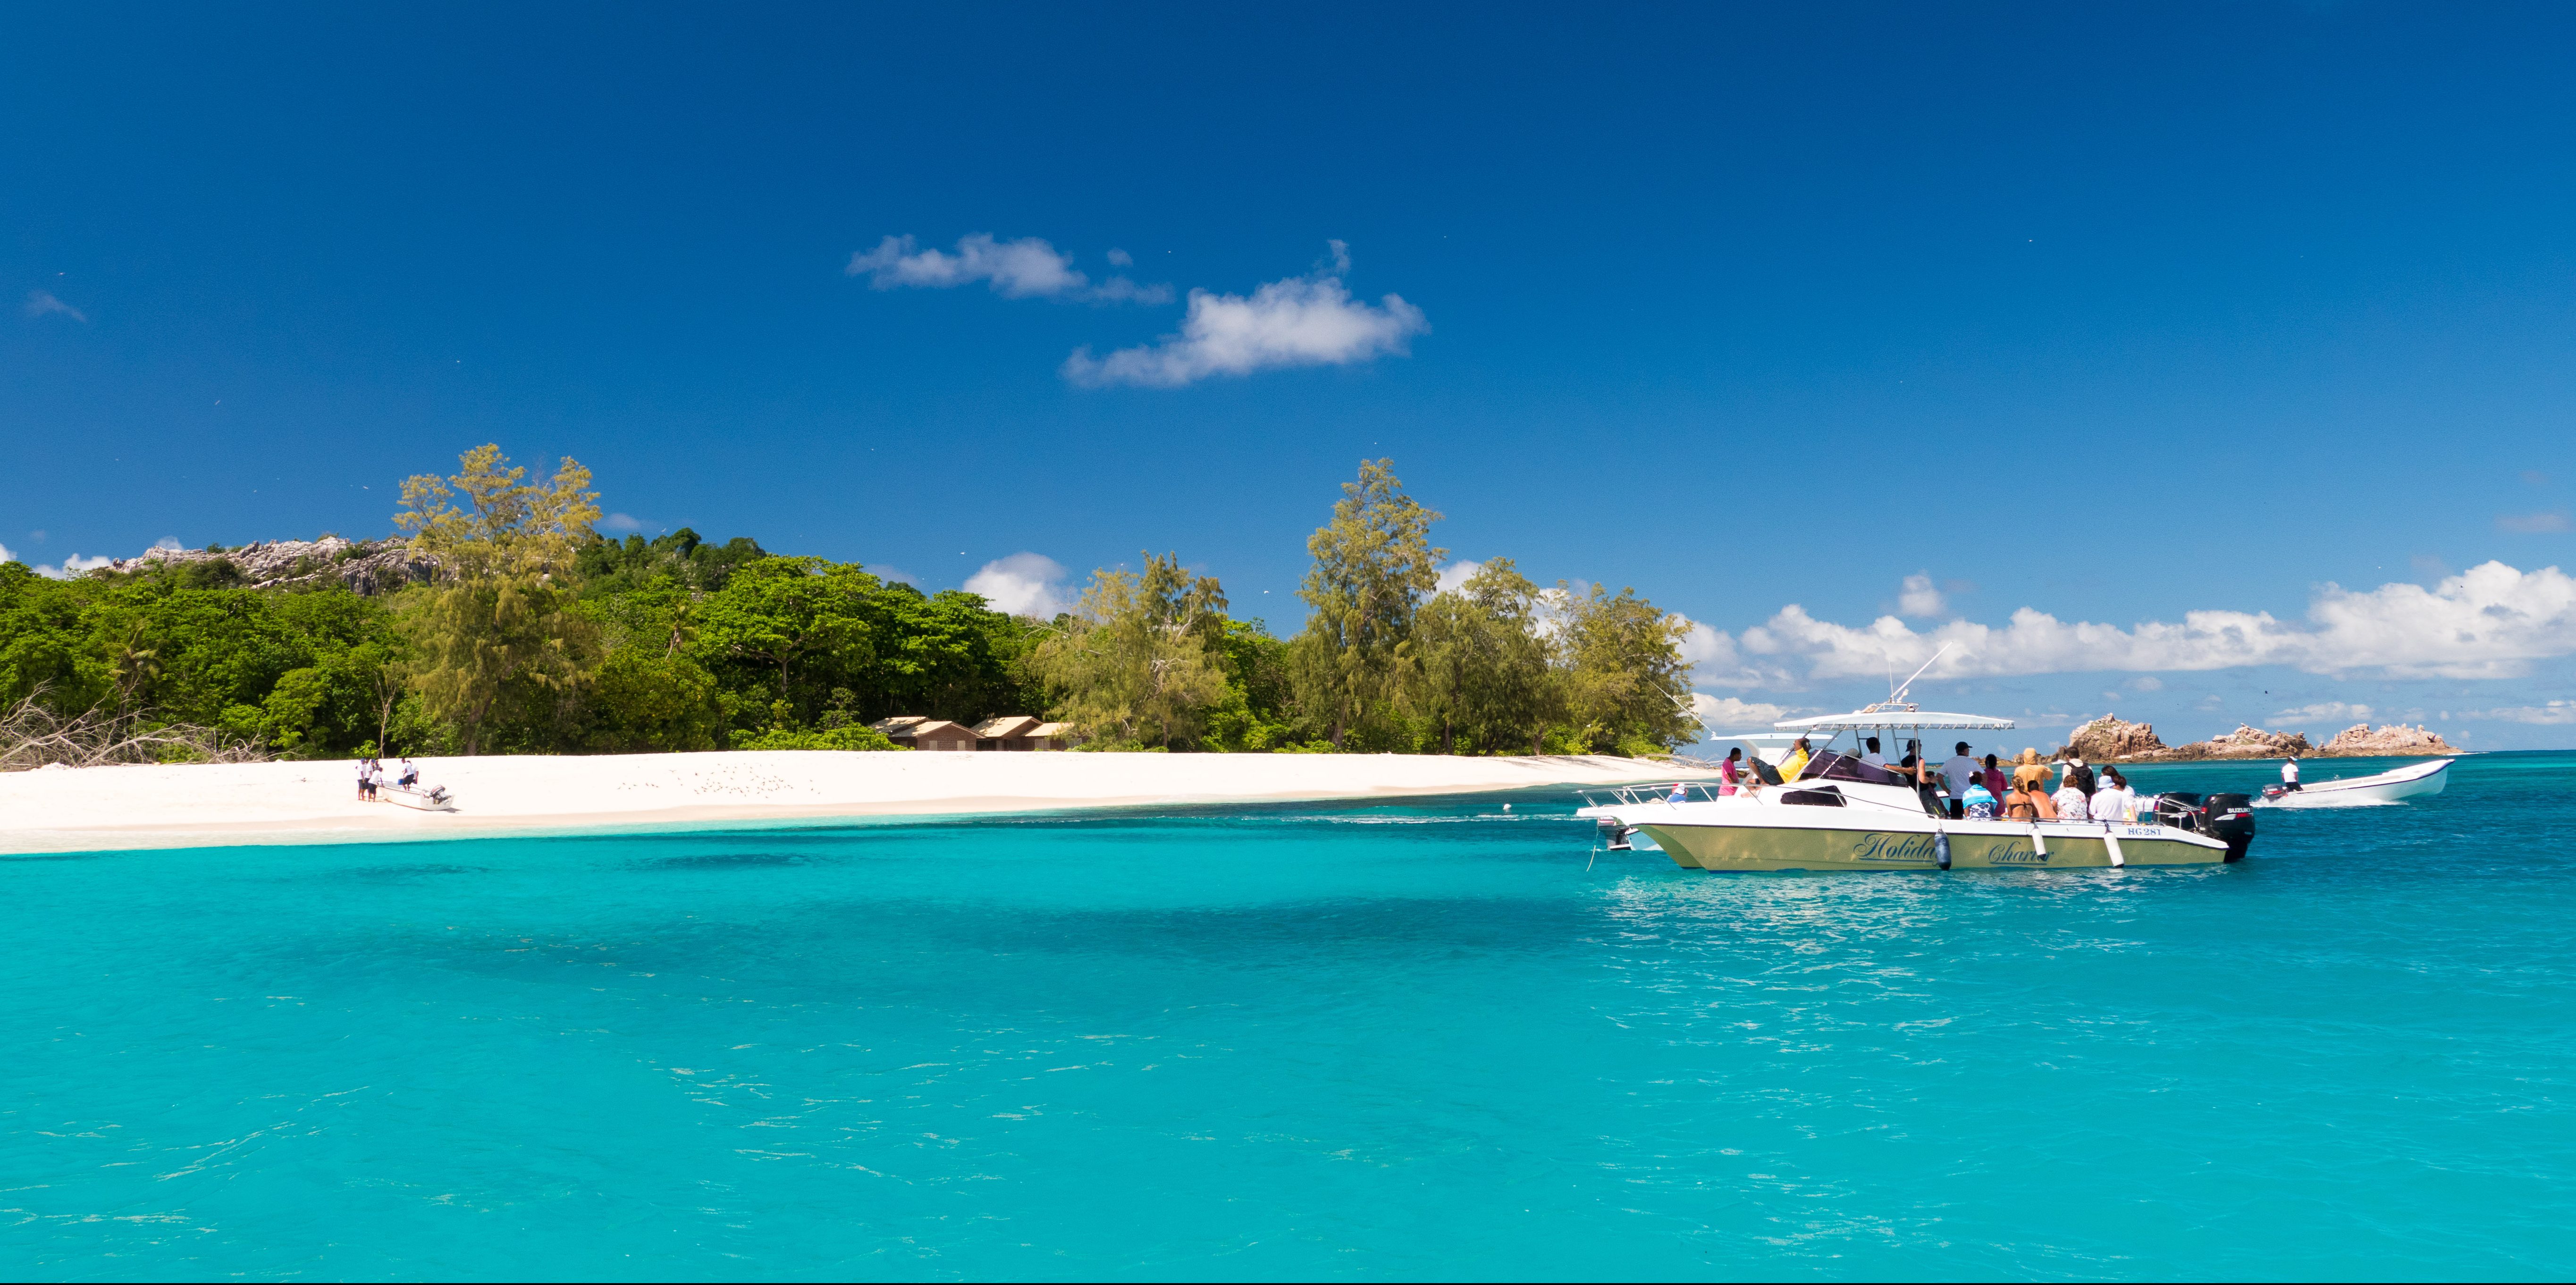 Visitors to Bird Island, in the Seychelles archipelago, are often wildlife conservation officers and conservation volunteers. 